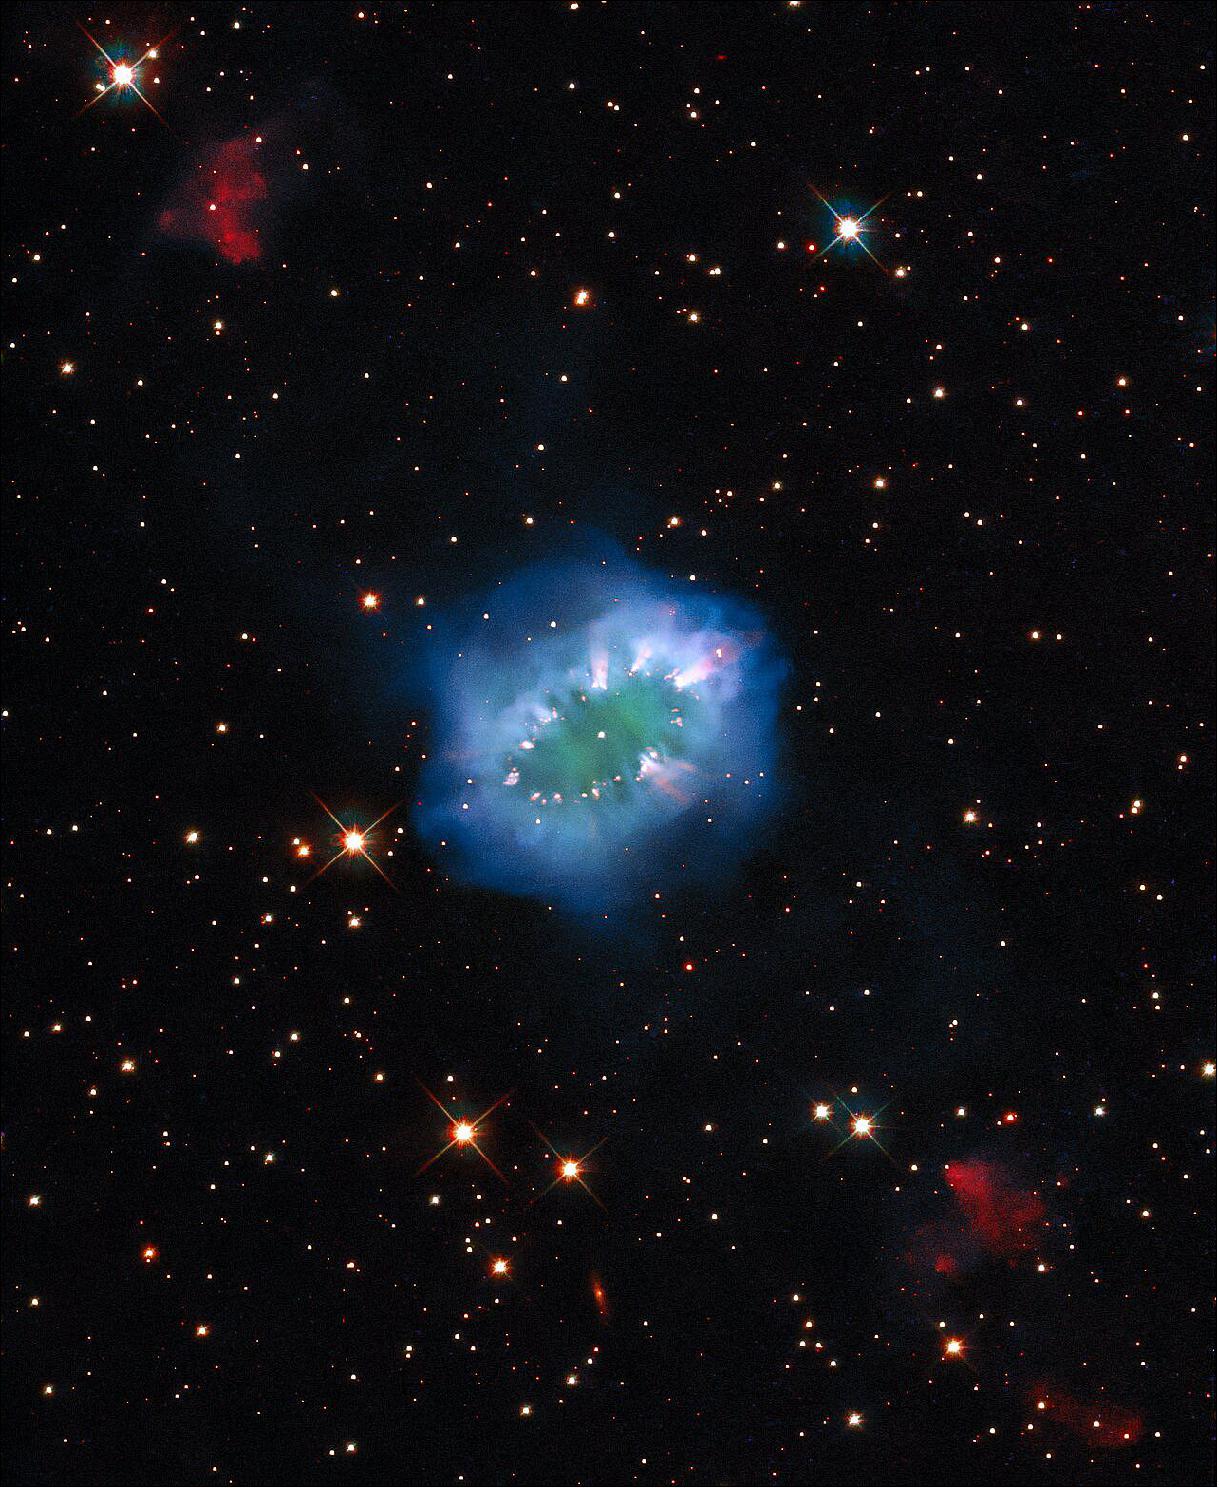 Figure 89: The interaction of two doomed stars has created this spectacular ring adorned with bright clumps of gas — a diamond necklace of cosmic proportions. Fittingly known as the Necklace Nebula, this planetary nebula is located 15,000 light-years away from Earth in the small, dim constellation of Sagitta (The Arrow), image credit: ESA/Hubble & NASA, K. Noll; CC BY 4.0)